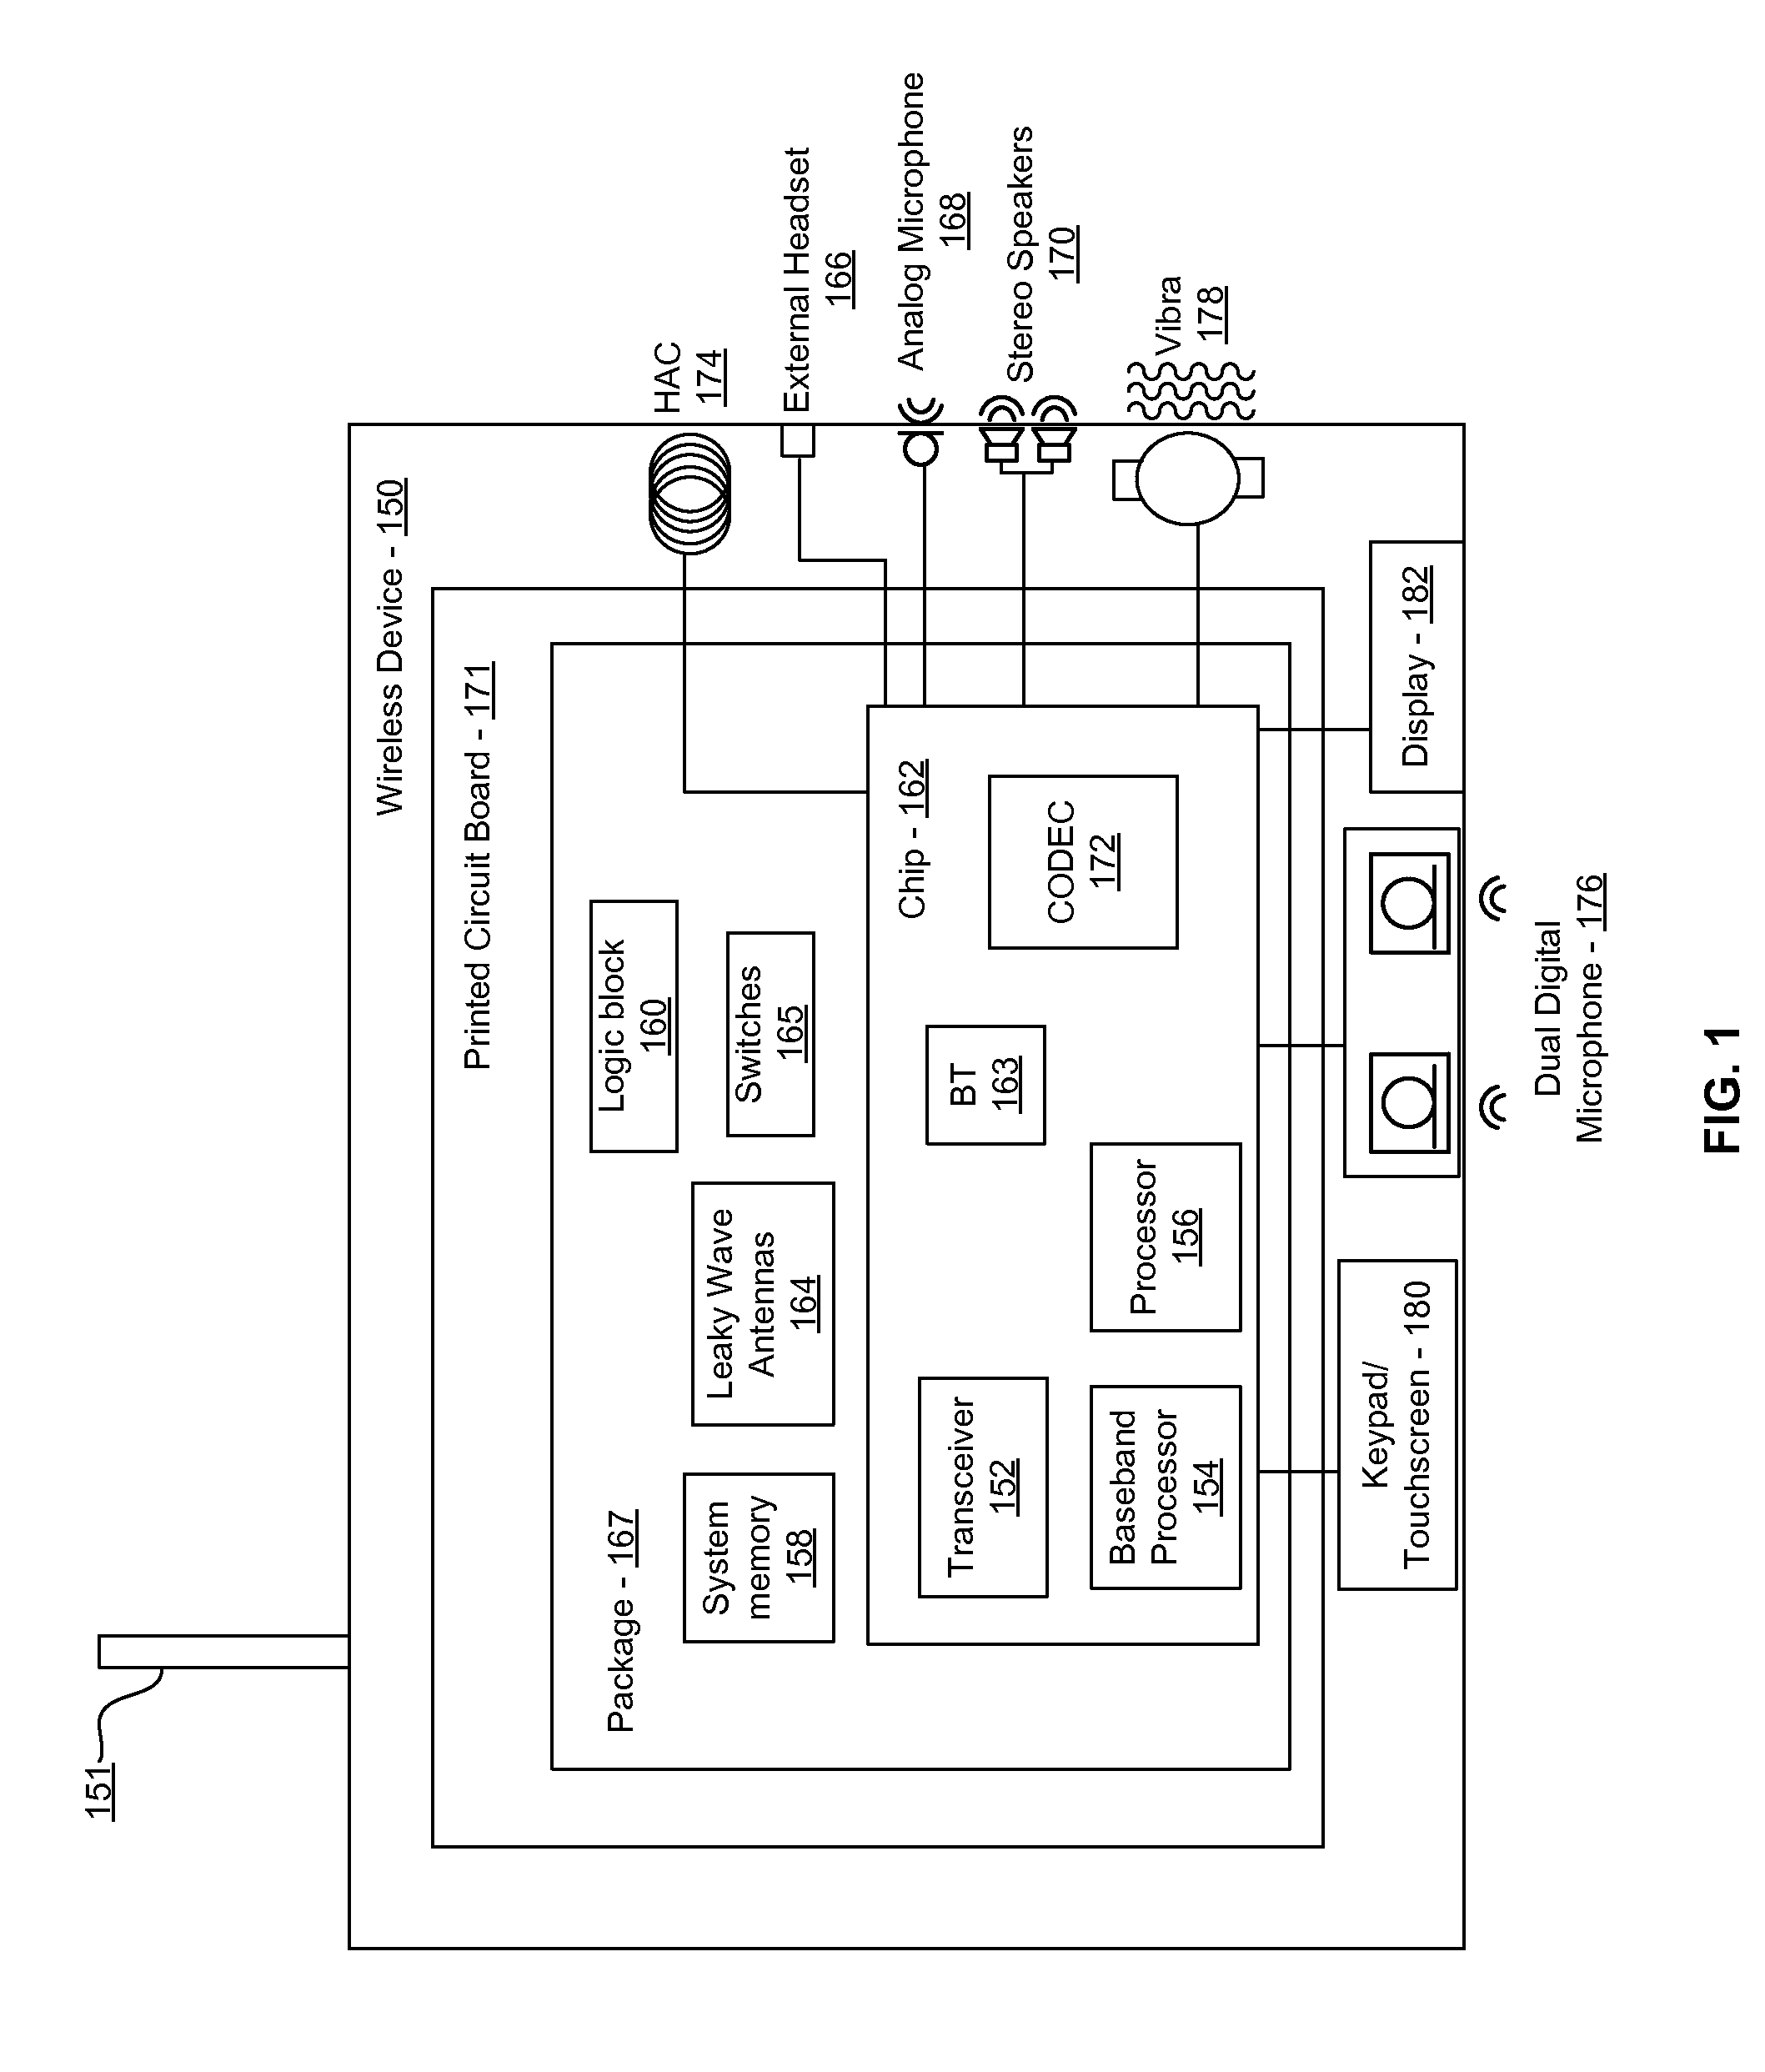 Method and system for a leaky wave antenna on an integrated circuit package